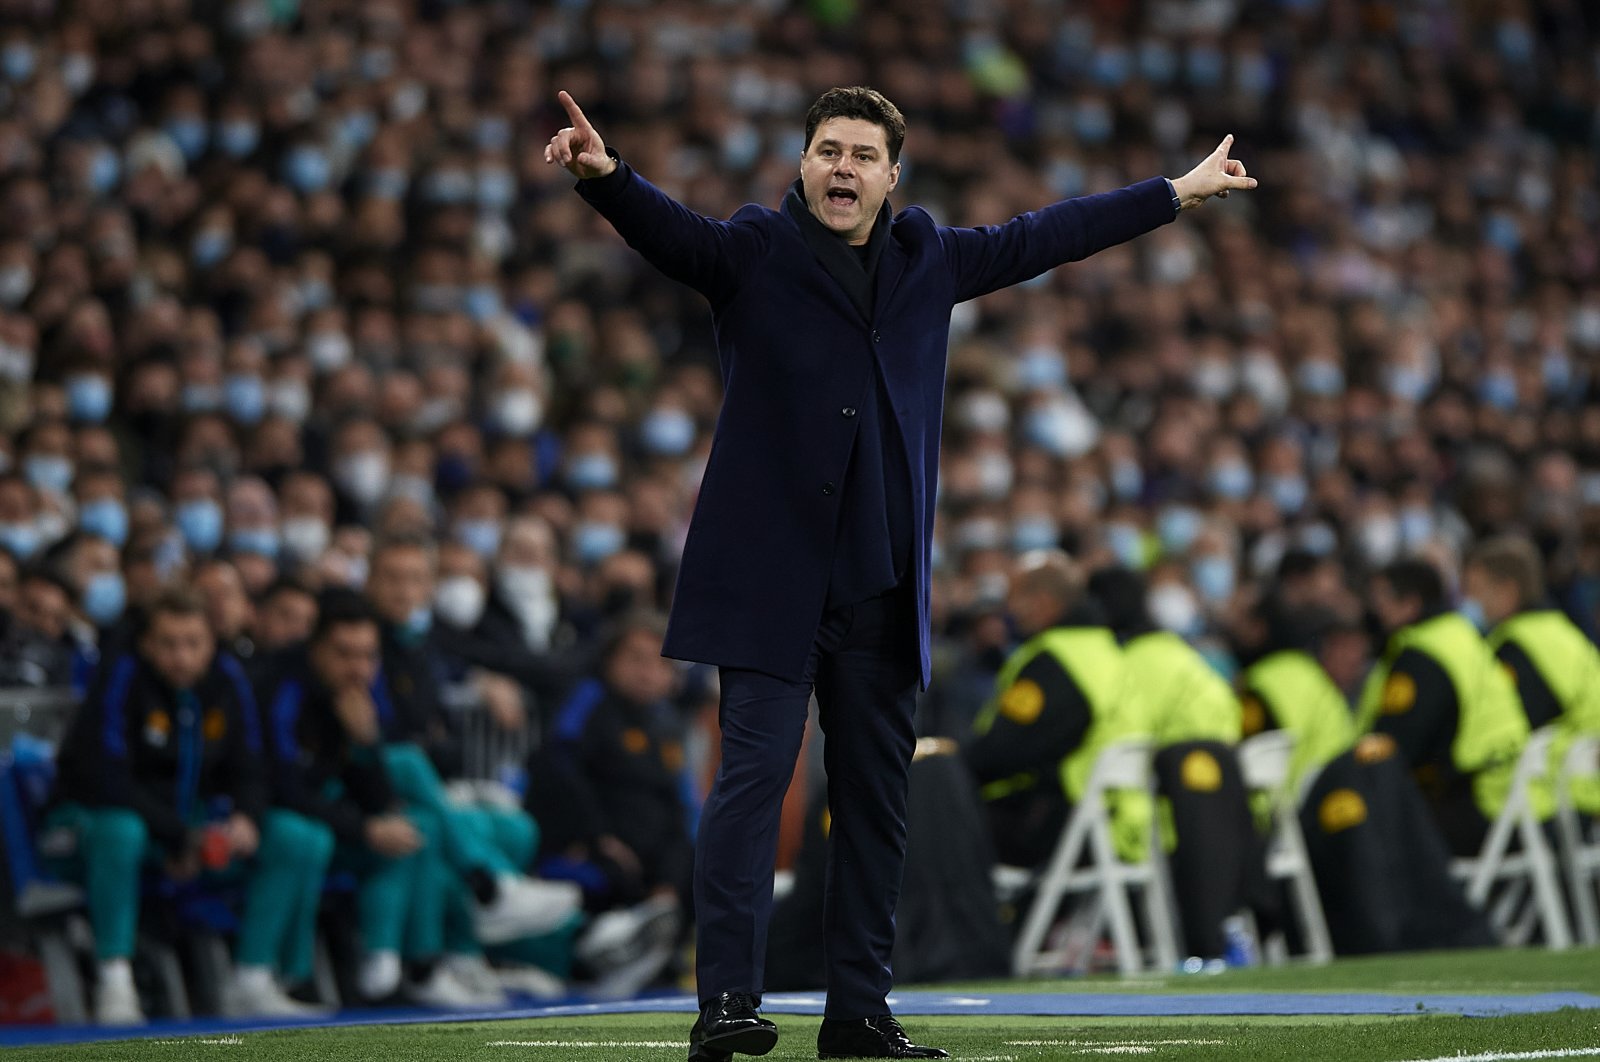 Mauricio Pochettino reacts during the UEFA Champions League round of 16 match between Real Madrid and Paris Saint-Germain at Santiago Bernabeu, Madrid, Spain, March 9, 2022. (Getty Images Photo)